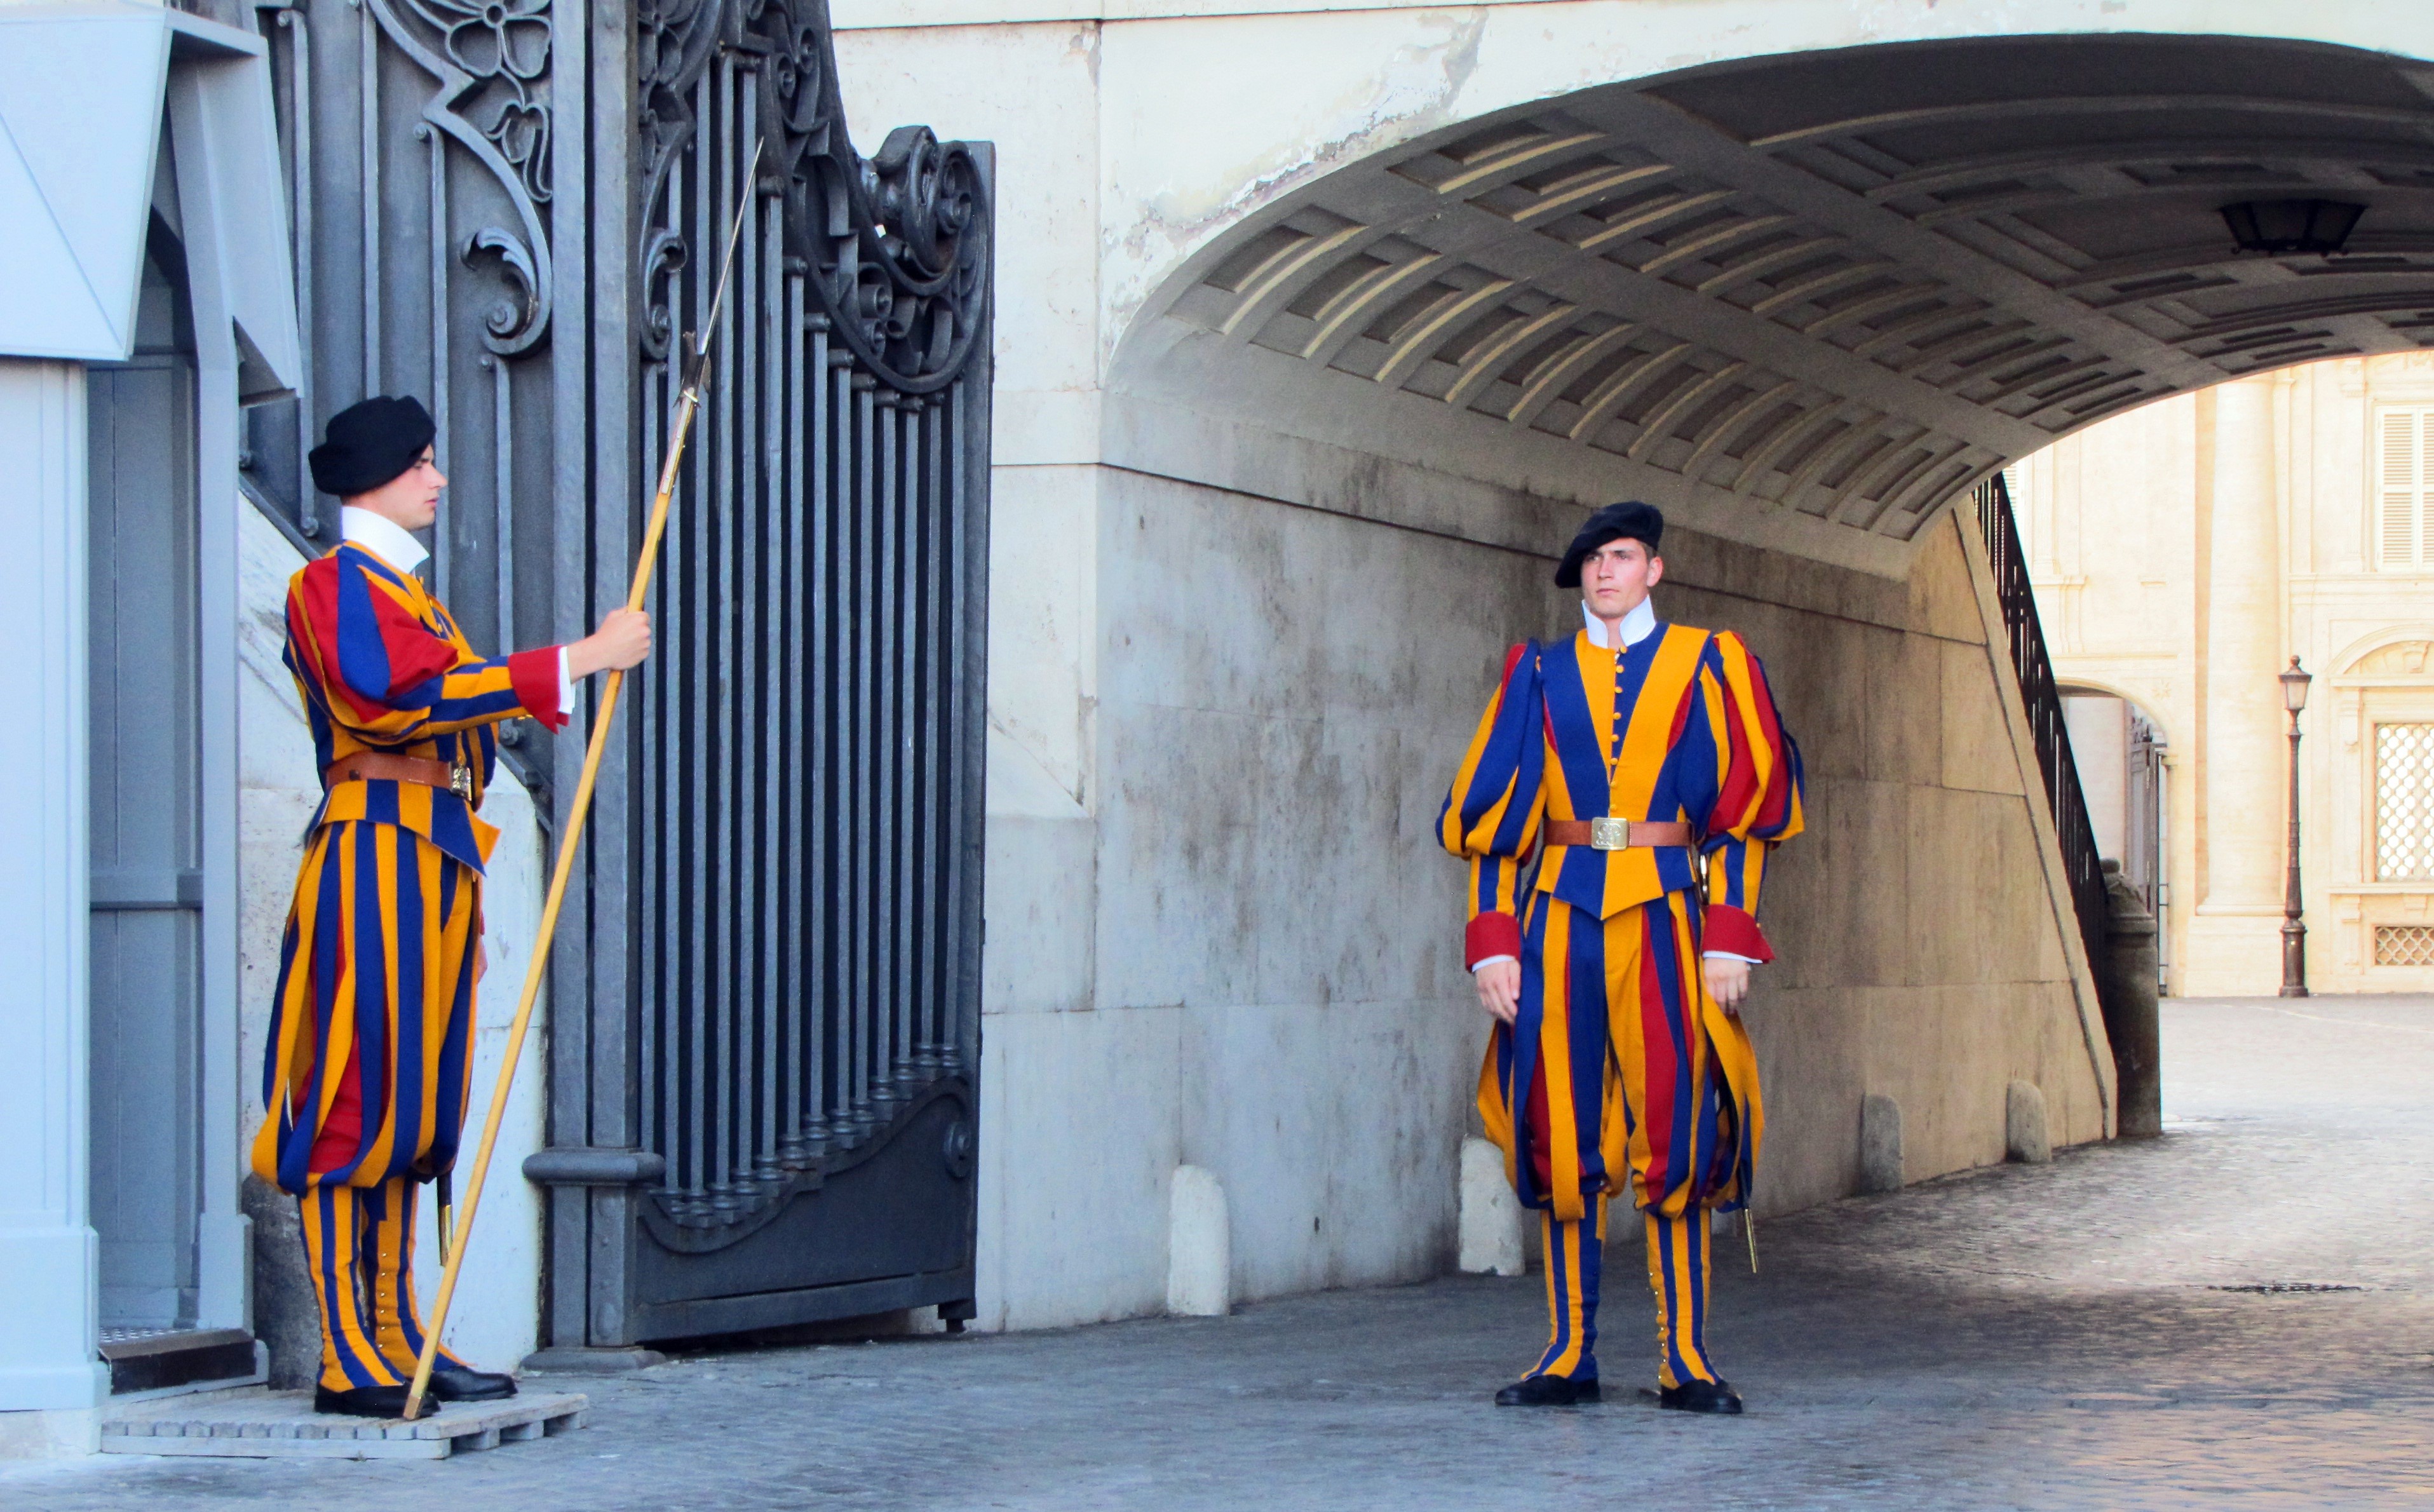 While working at the Vatican, Sr. Mary Bernard Wiecezak taught a group of young Swiss Guards to speak English. (Pixabay/Alexander Lesnitsky)